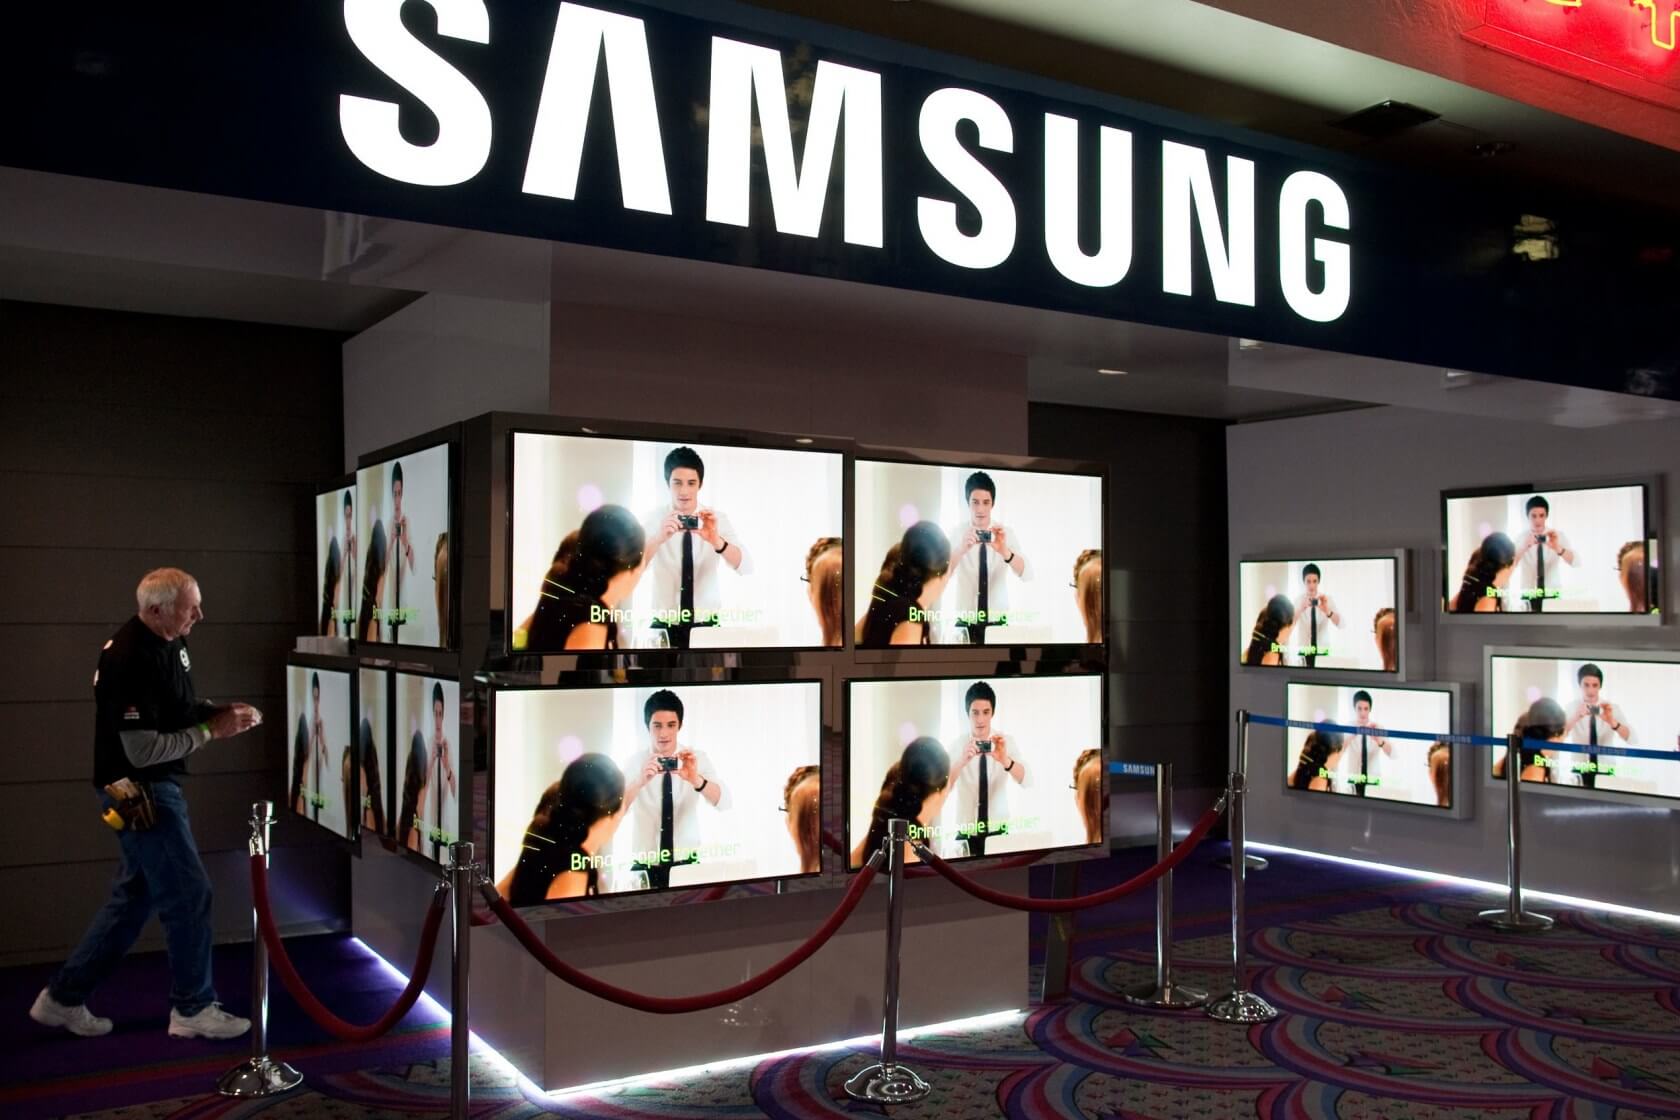 Samsung Wants to Bring Web Browsing, Office Work to the TV